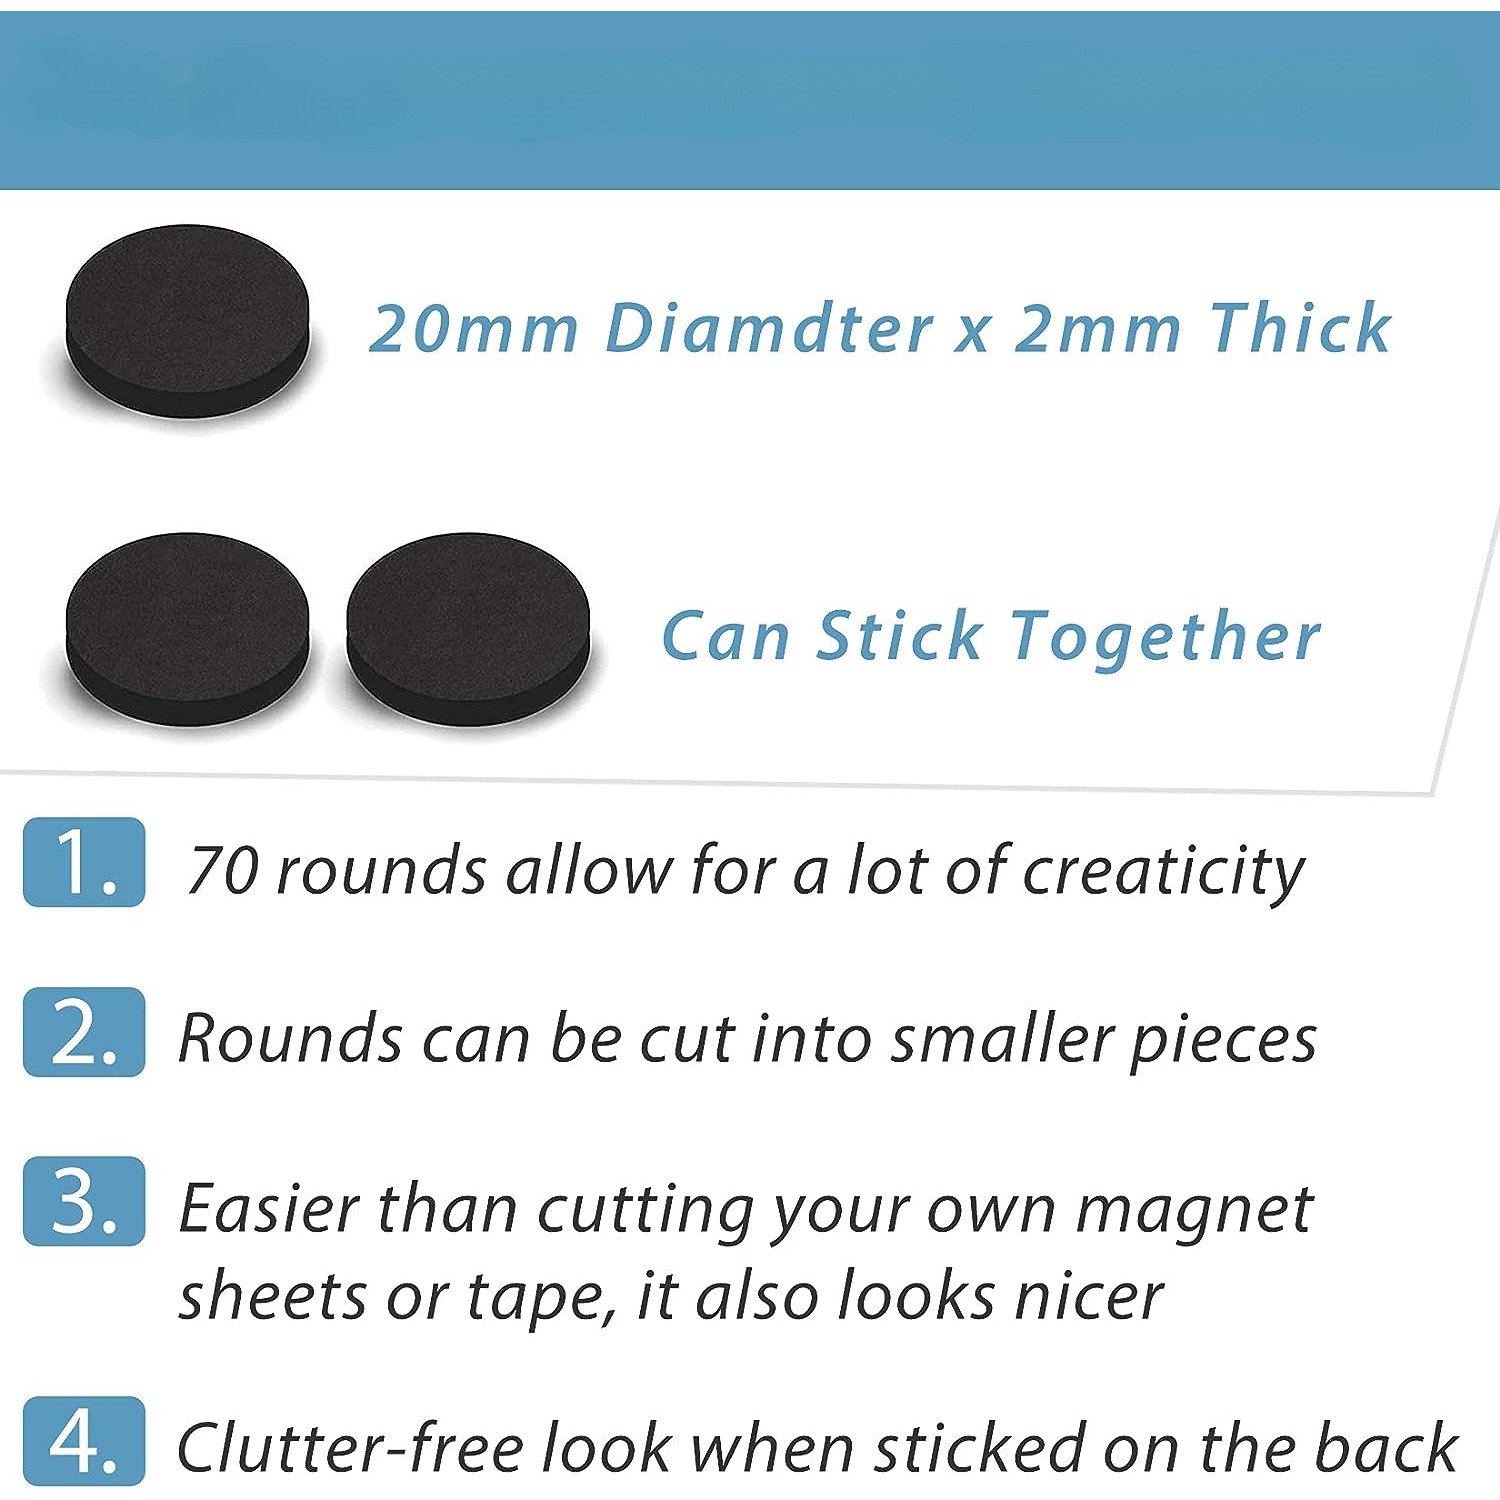  Magnetic Dots - Self Adhesive Magnet (0.8 x 0.8) Peel & Stick  Circles Flexible Sticky Magnets Sheets is Alternative to Squares, Stickers,  Strip and Tape (100 Pcs) : Office Products